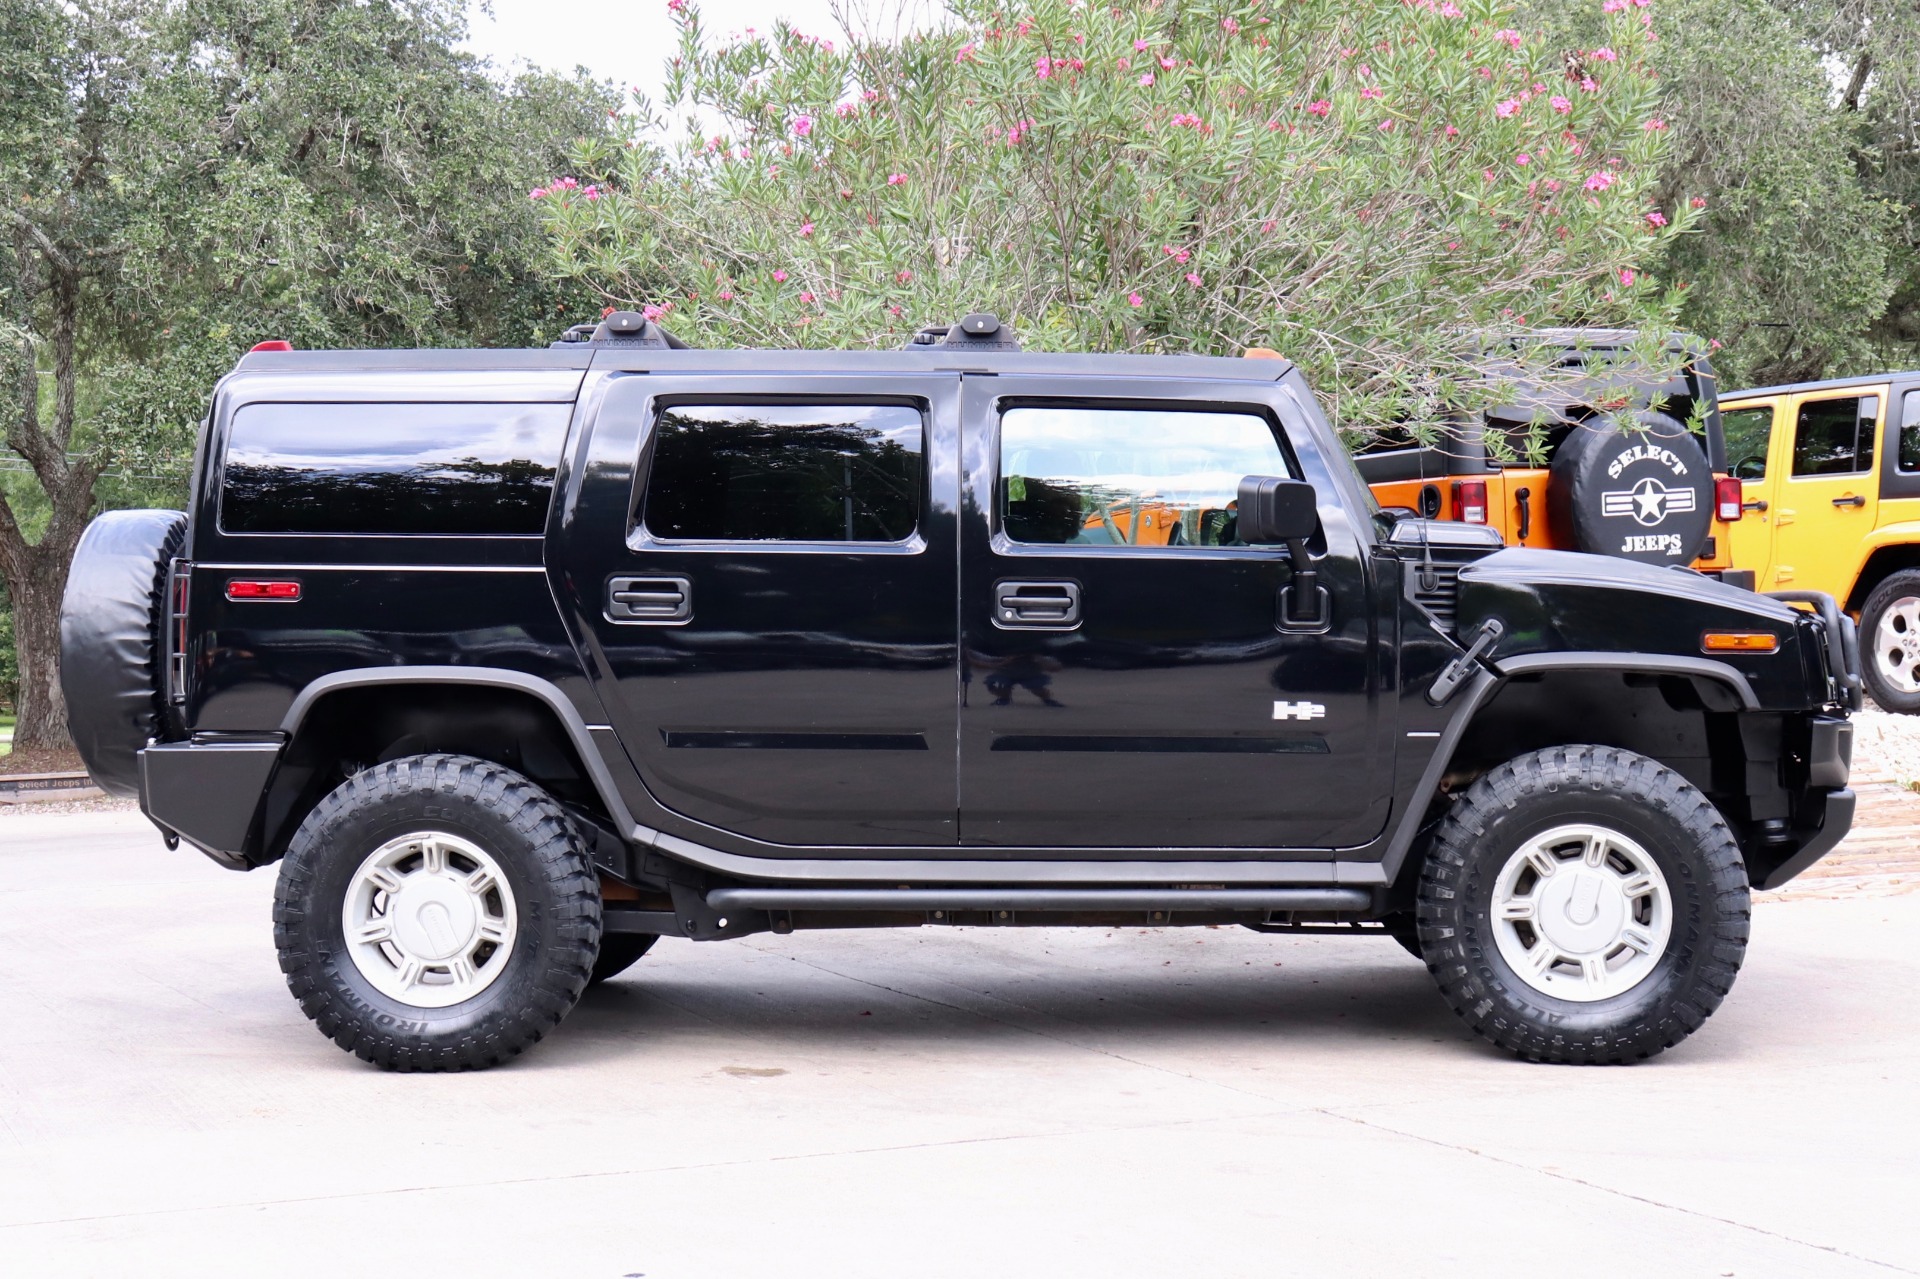 Used 2004 Hummer H2 4dr Wgn For Sale ($17,688) | Select Jeeps Inc ...